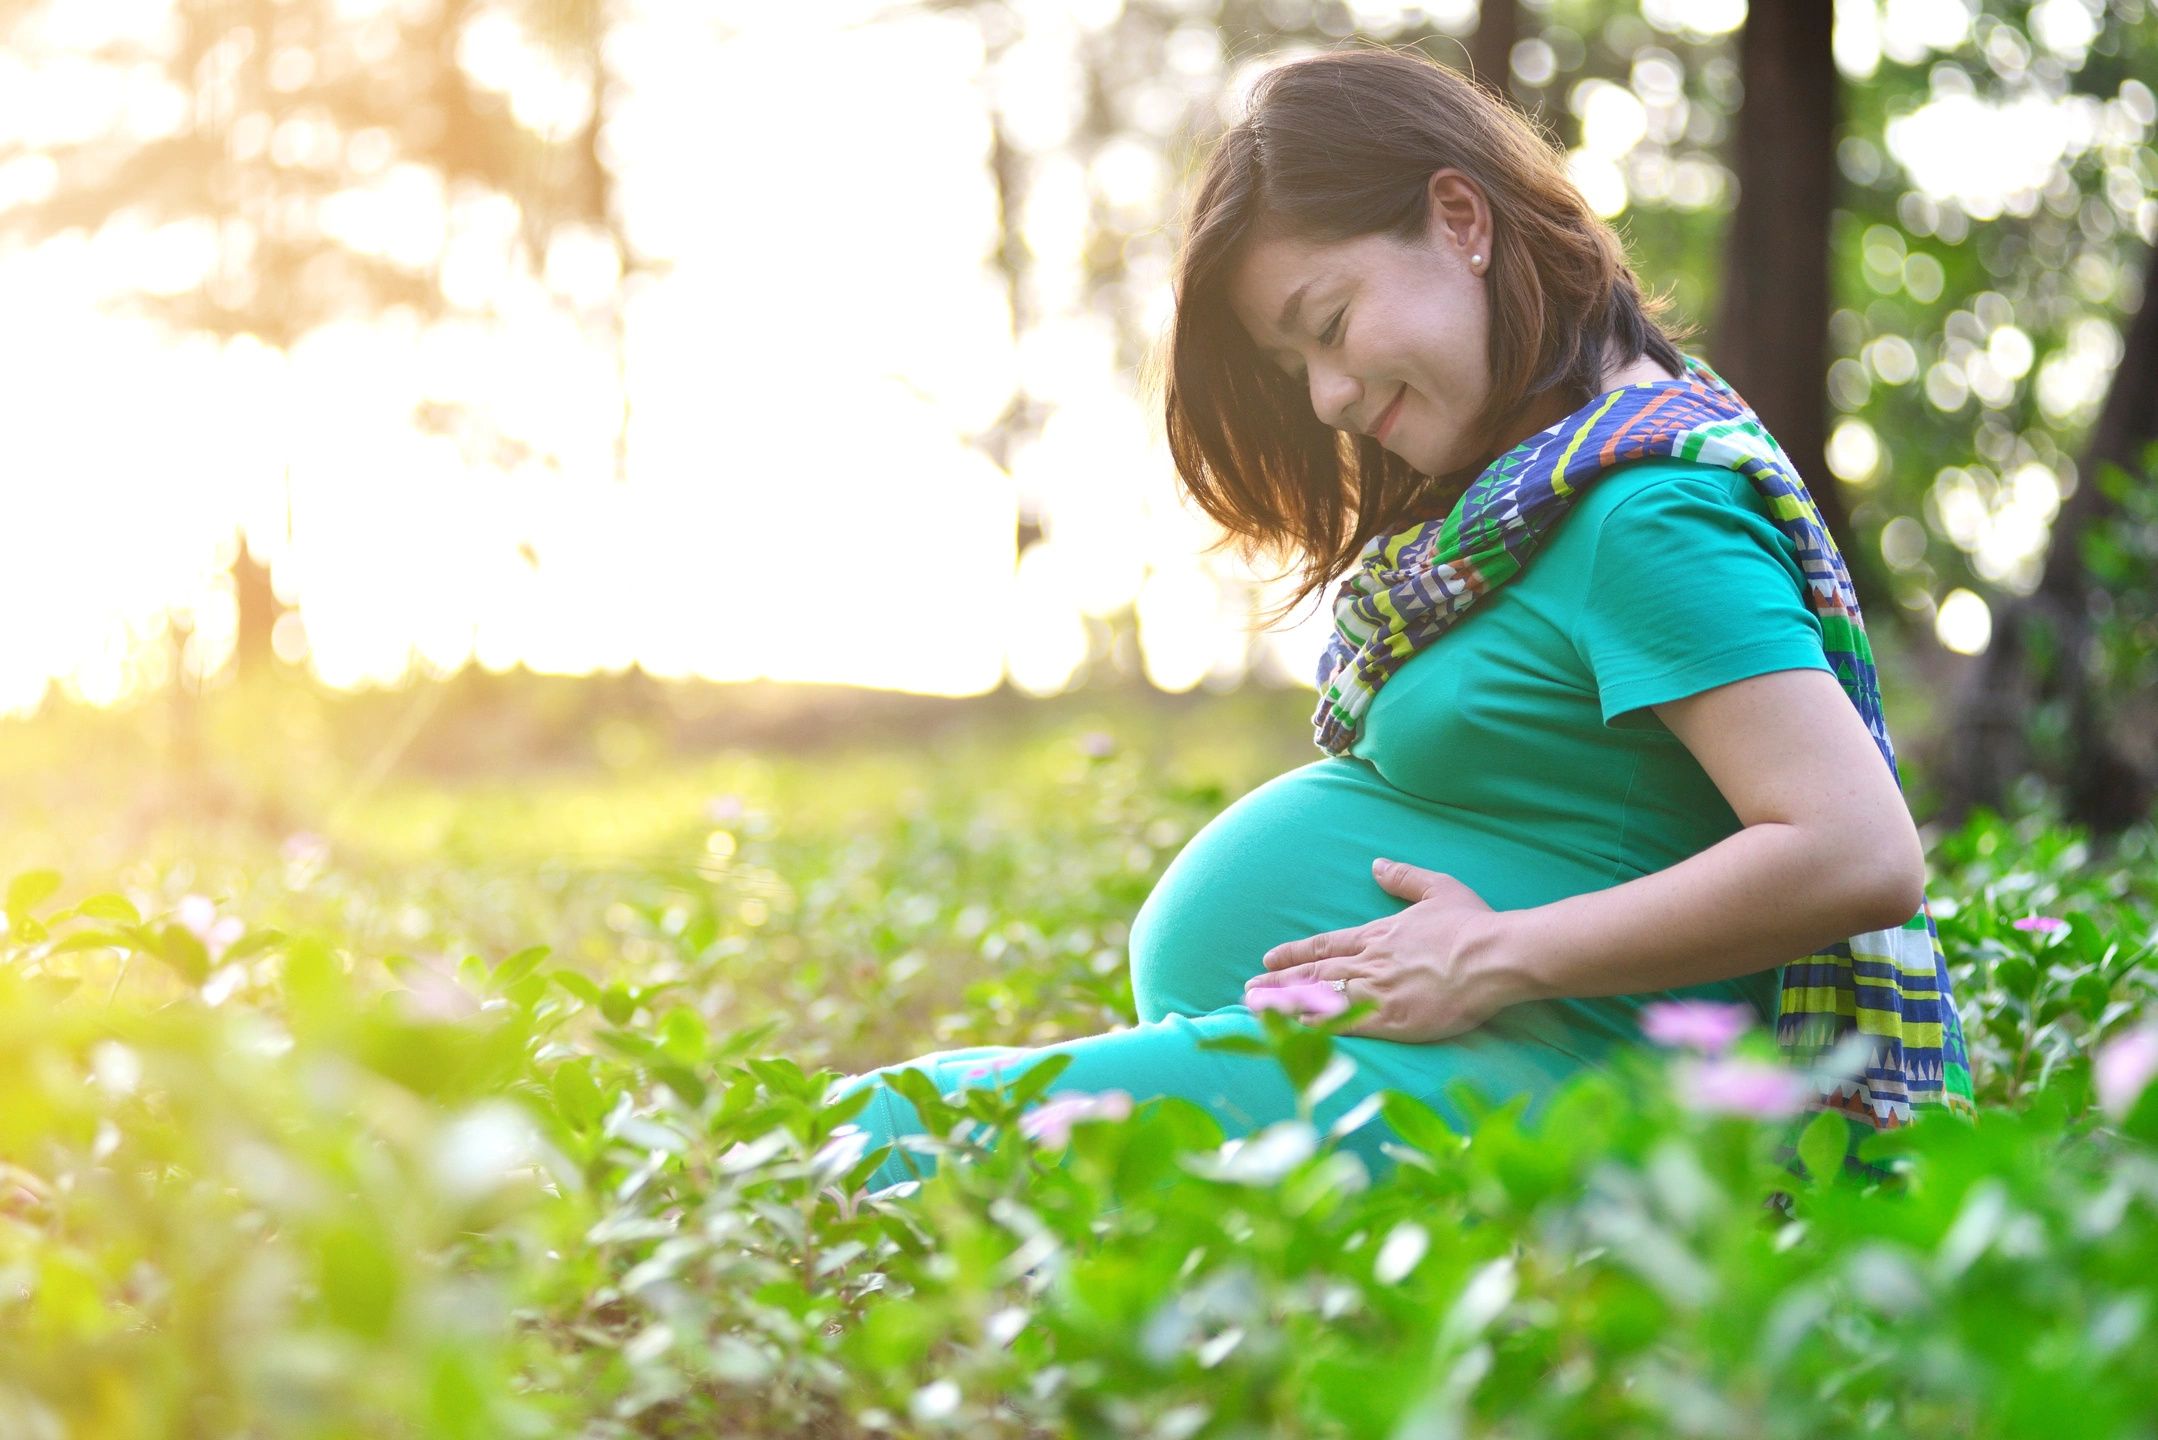 Pregnant woman sitting in a field of flowers and sunshine holds her belly and smiles at it.She's wearing a teal dress and a multi-colored scarf.